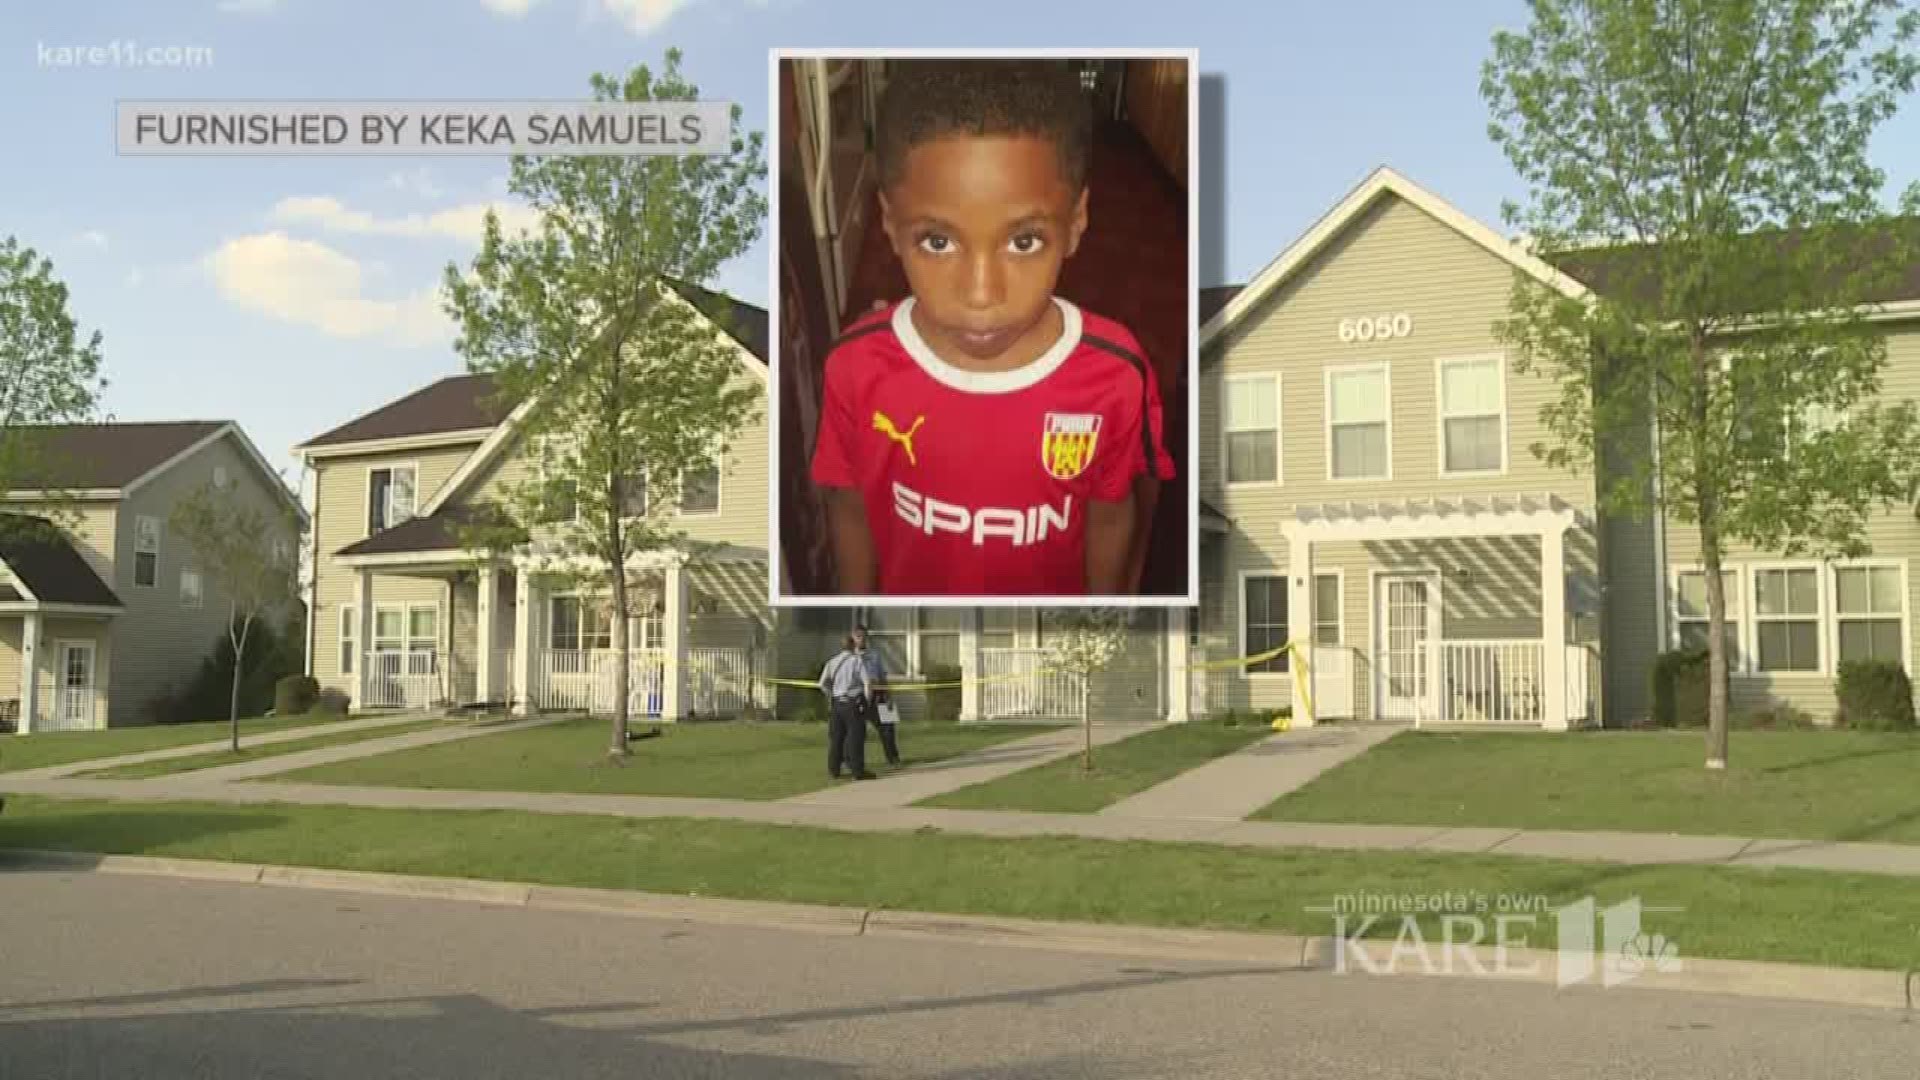 Child fatally shot with unsecured gun